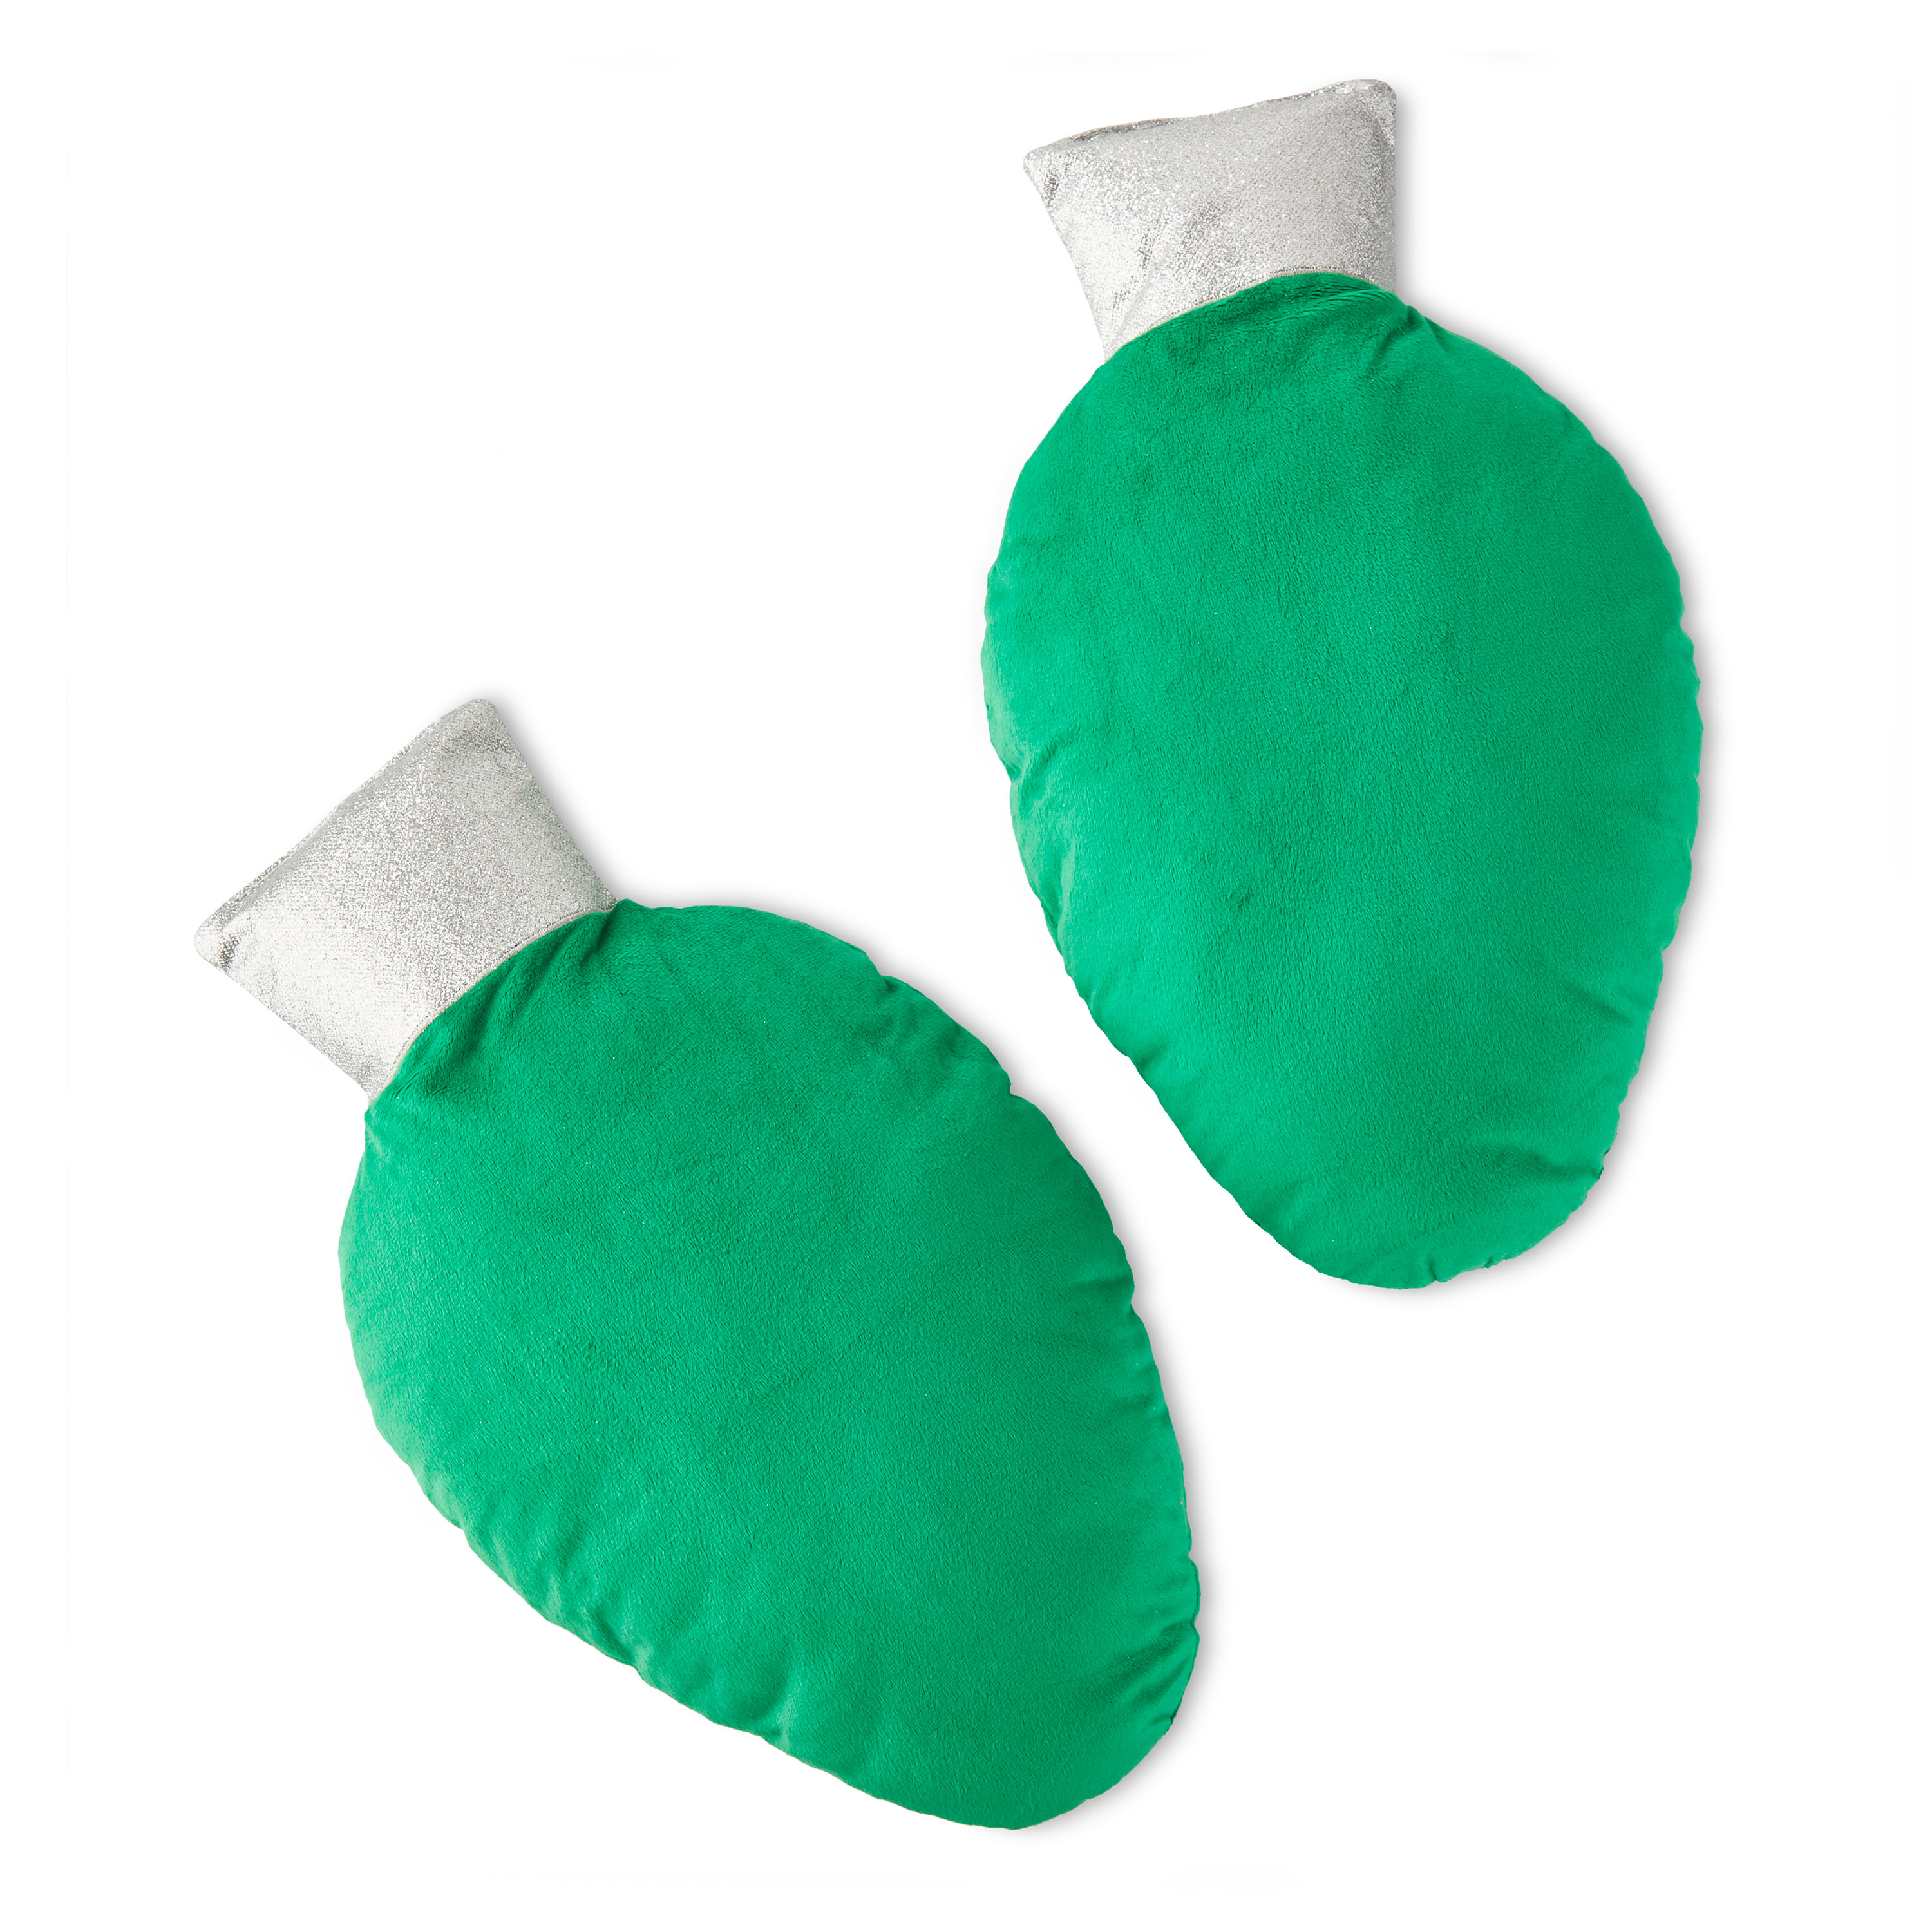 Holiday Time Christmas 15 inch Green C9 Bulb Decorative Pillows Plush, 2-pack - image 3 of 6